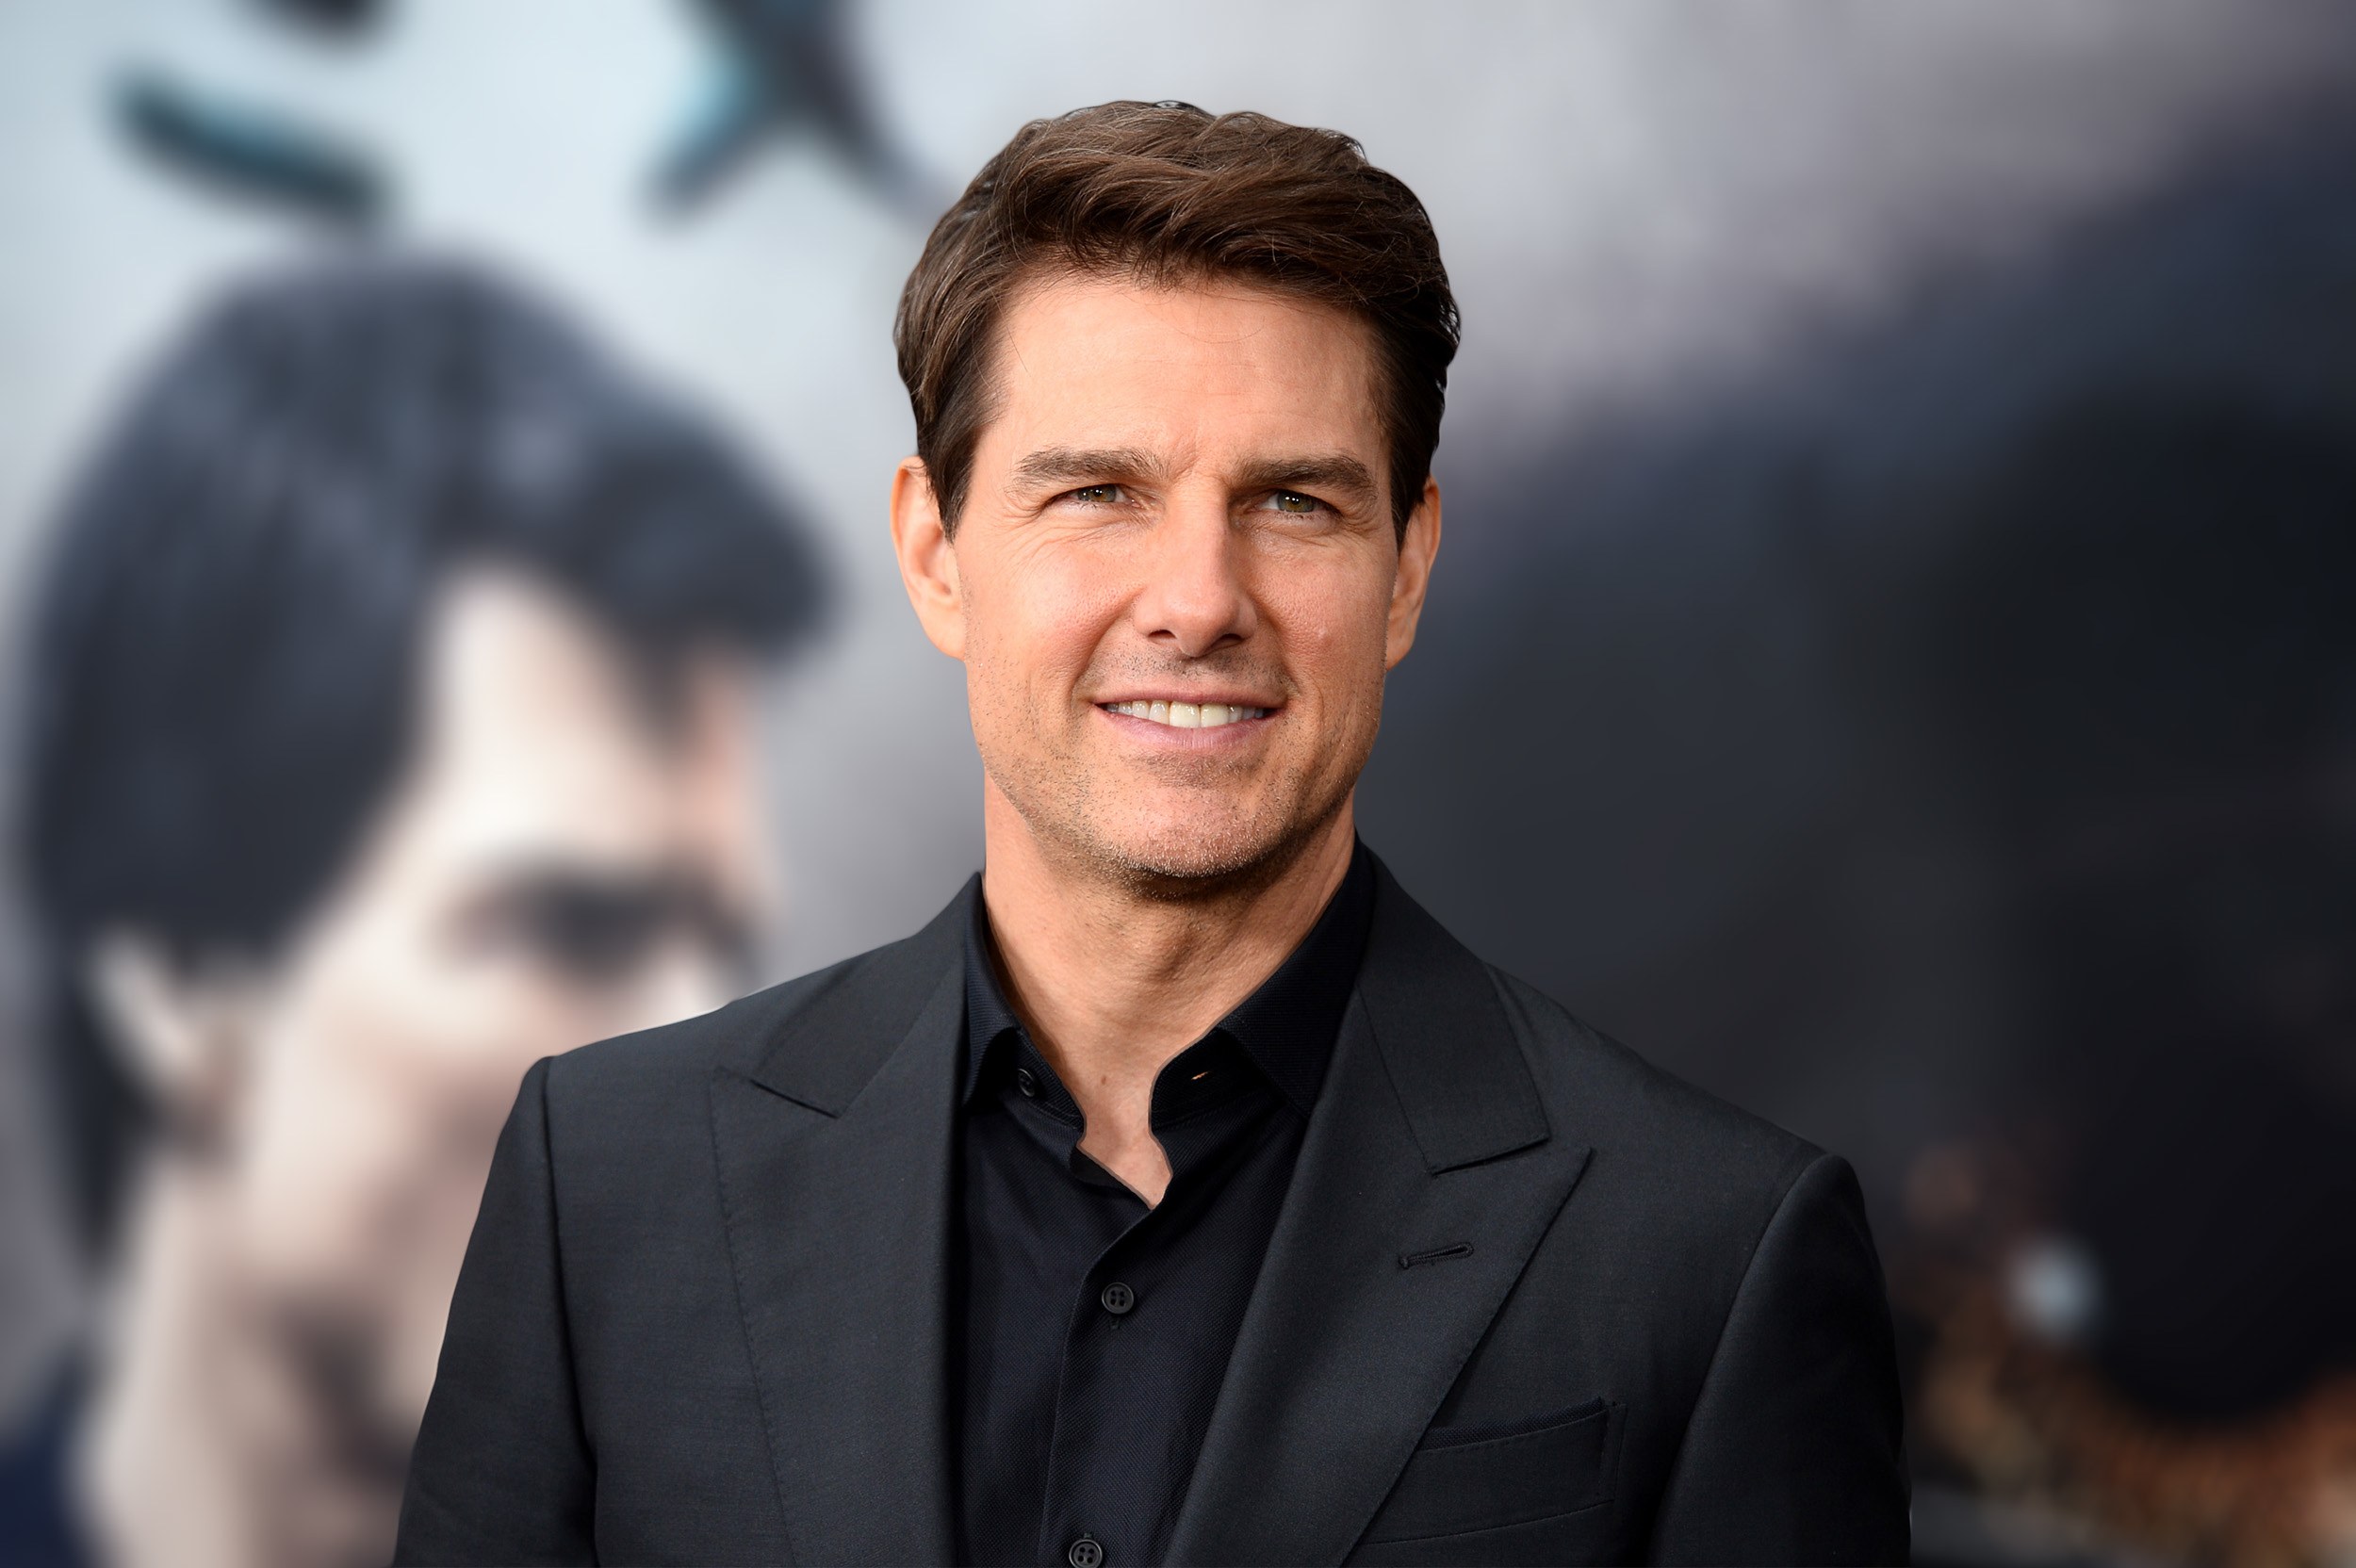 Wallpapers movies Tom Cruise male celebrities on the desktop